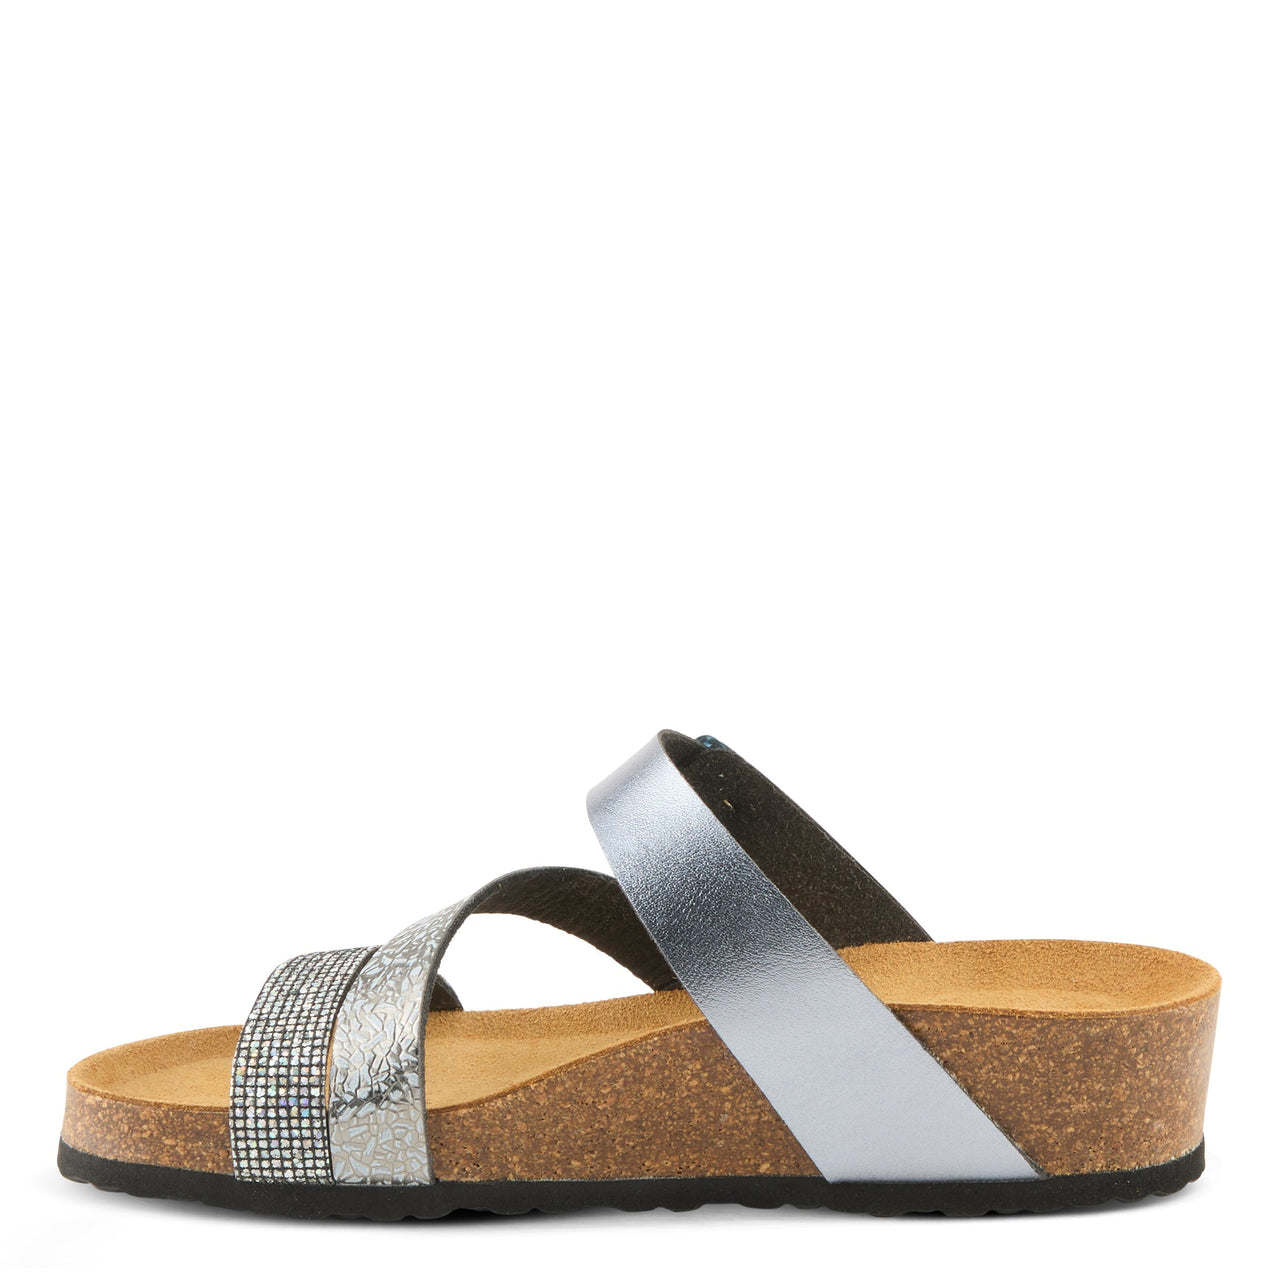 Elegant Spring Step Arenall Sandals in white leather with decorative buckle detail